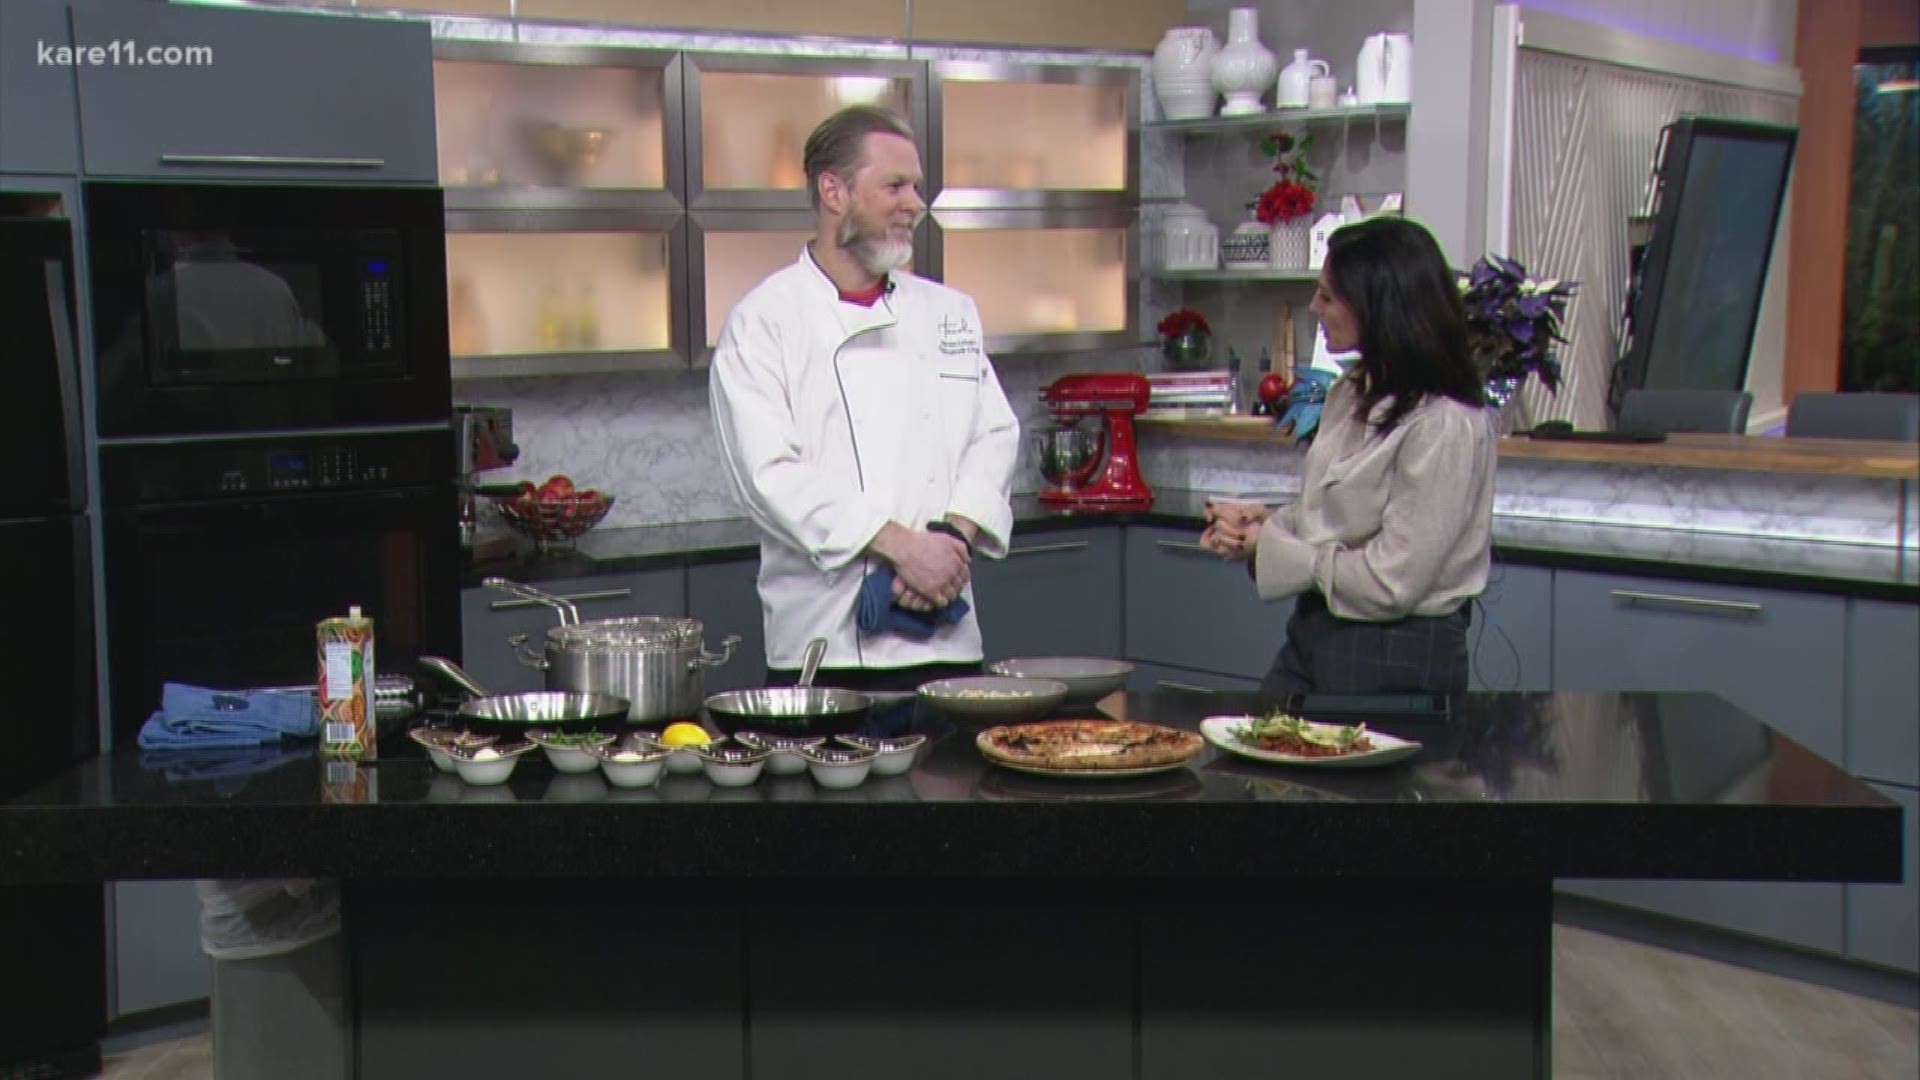 You can take a break from your kitchen this holiday season and check out a new Minneapolis restaurant offering comfort food ideal for these colder months. Aaron Uban, head chef at "Tavola" the restaurant inside Elliot Park Hotel joined KARE 11 News at 4 to show off his dishes.